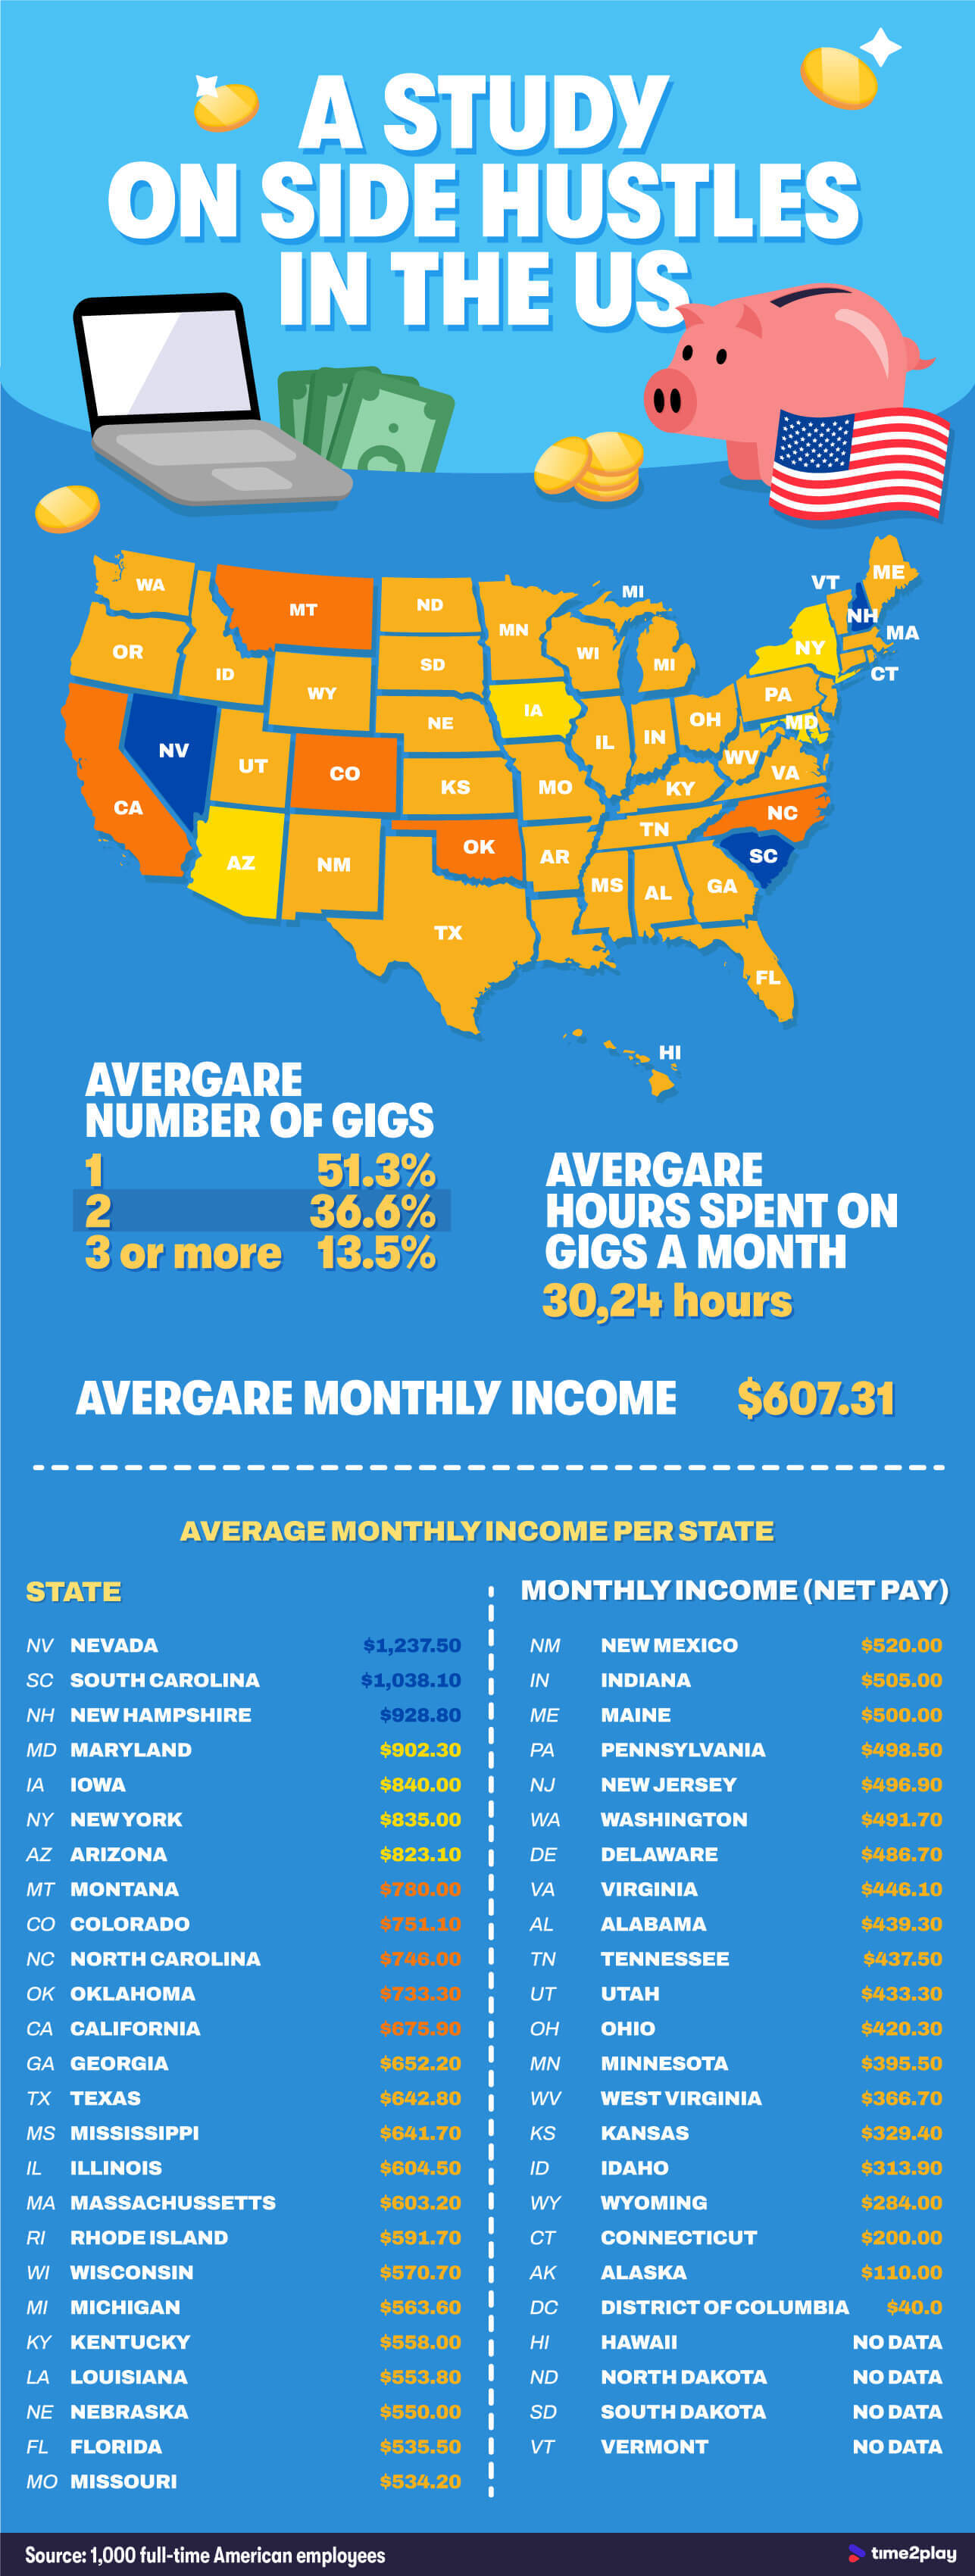 An infographic illustrating the average number of gigs, hours spent on gigs, and monthly income.